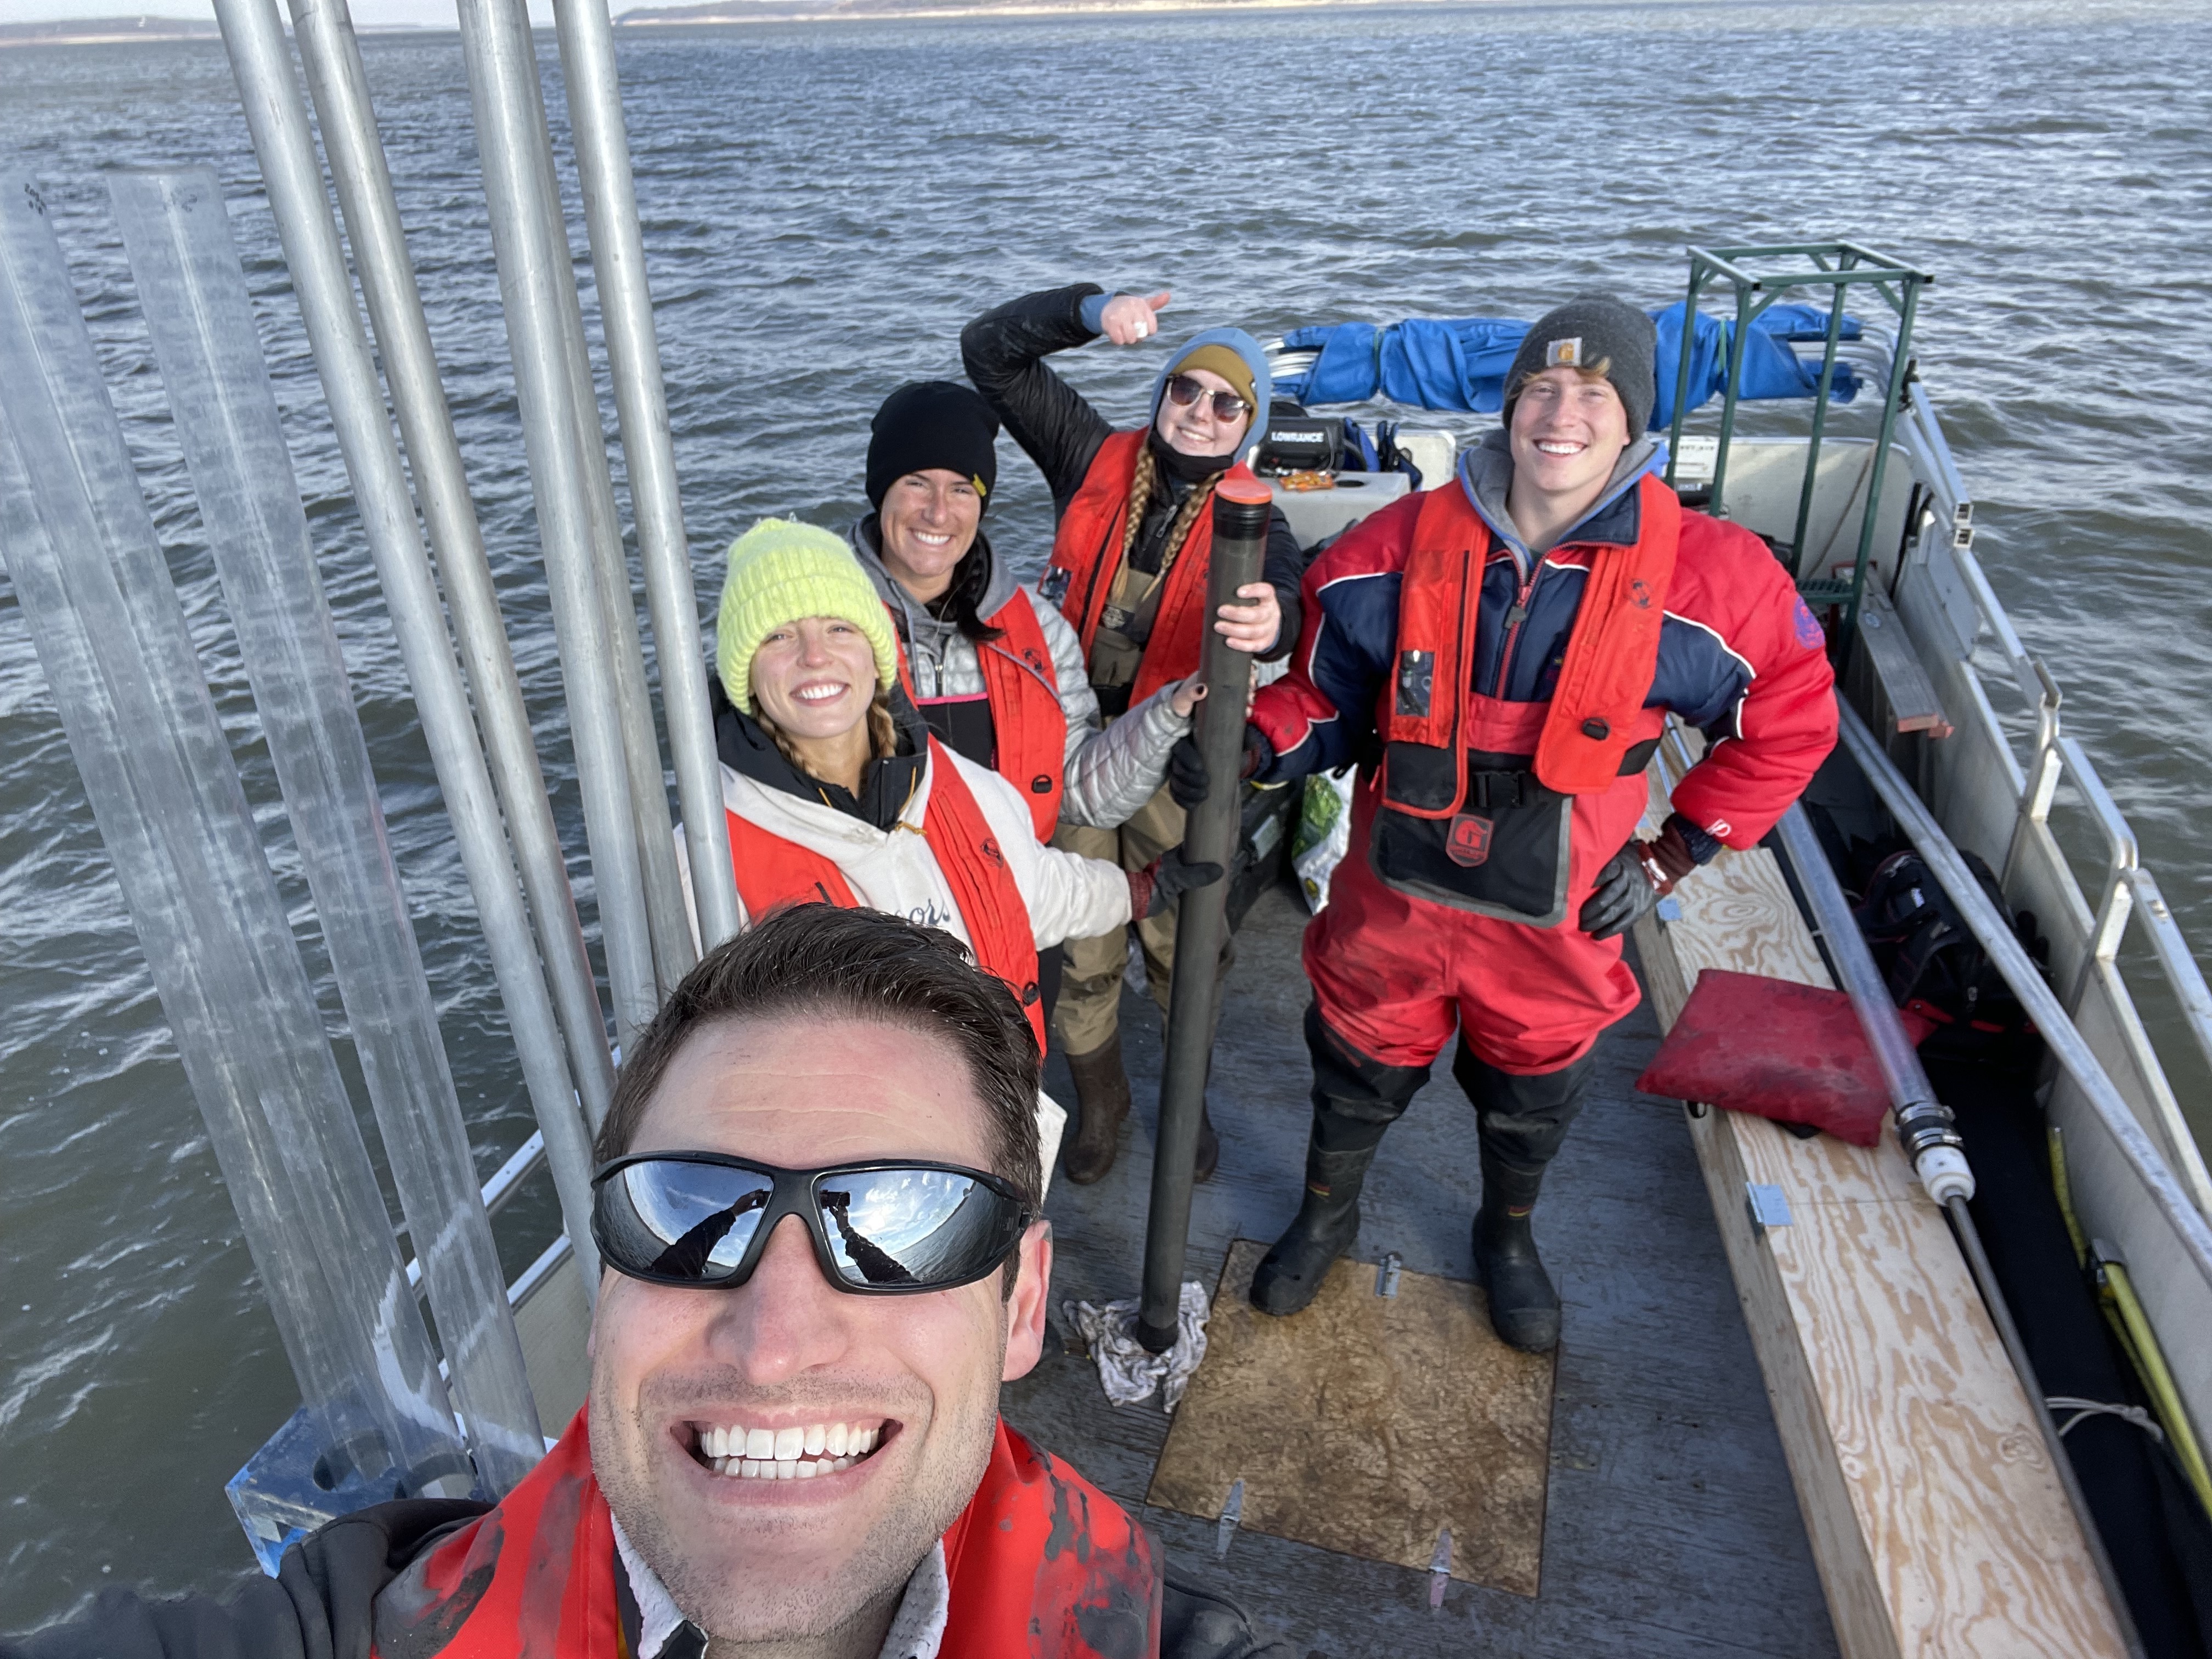 "Researcher and group of students standing on boat in lake and smiling at camera"